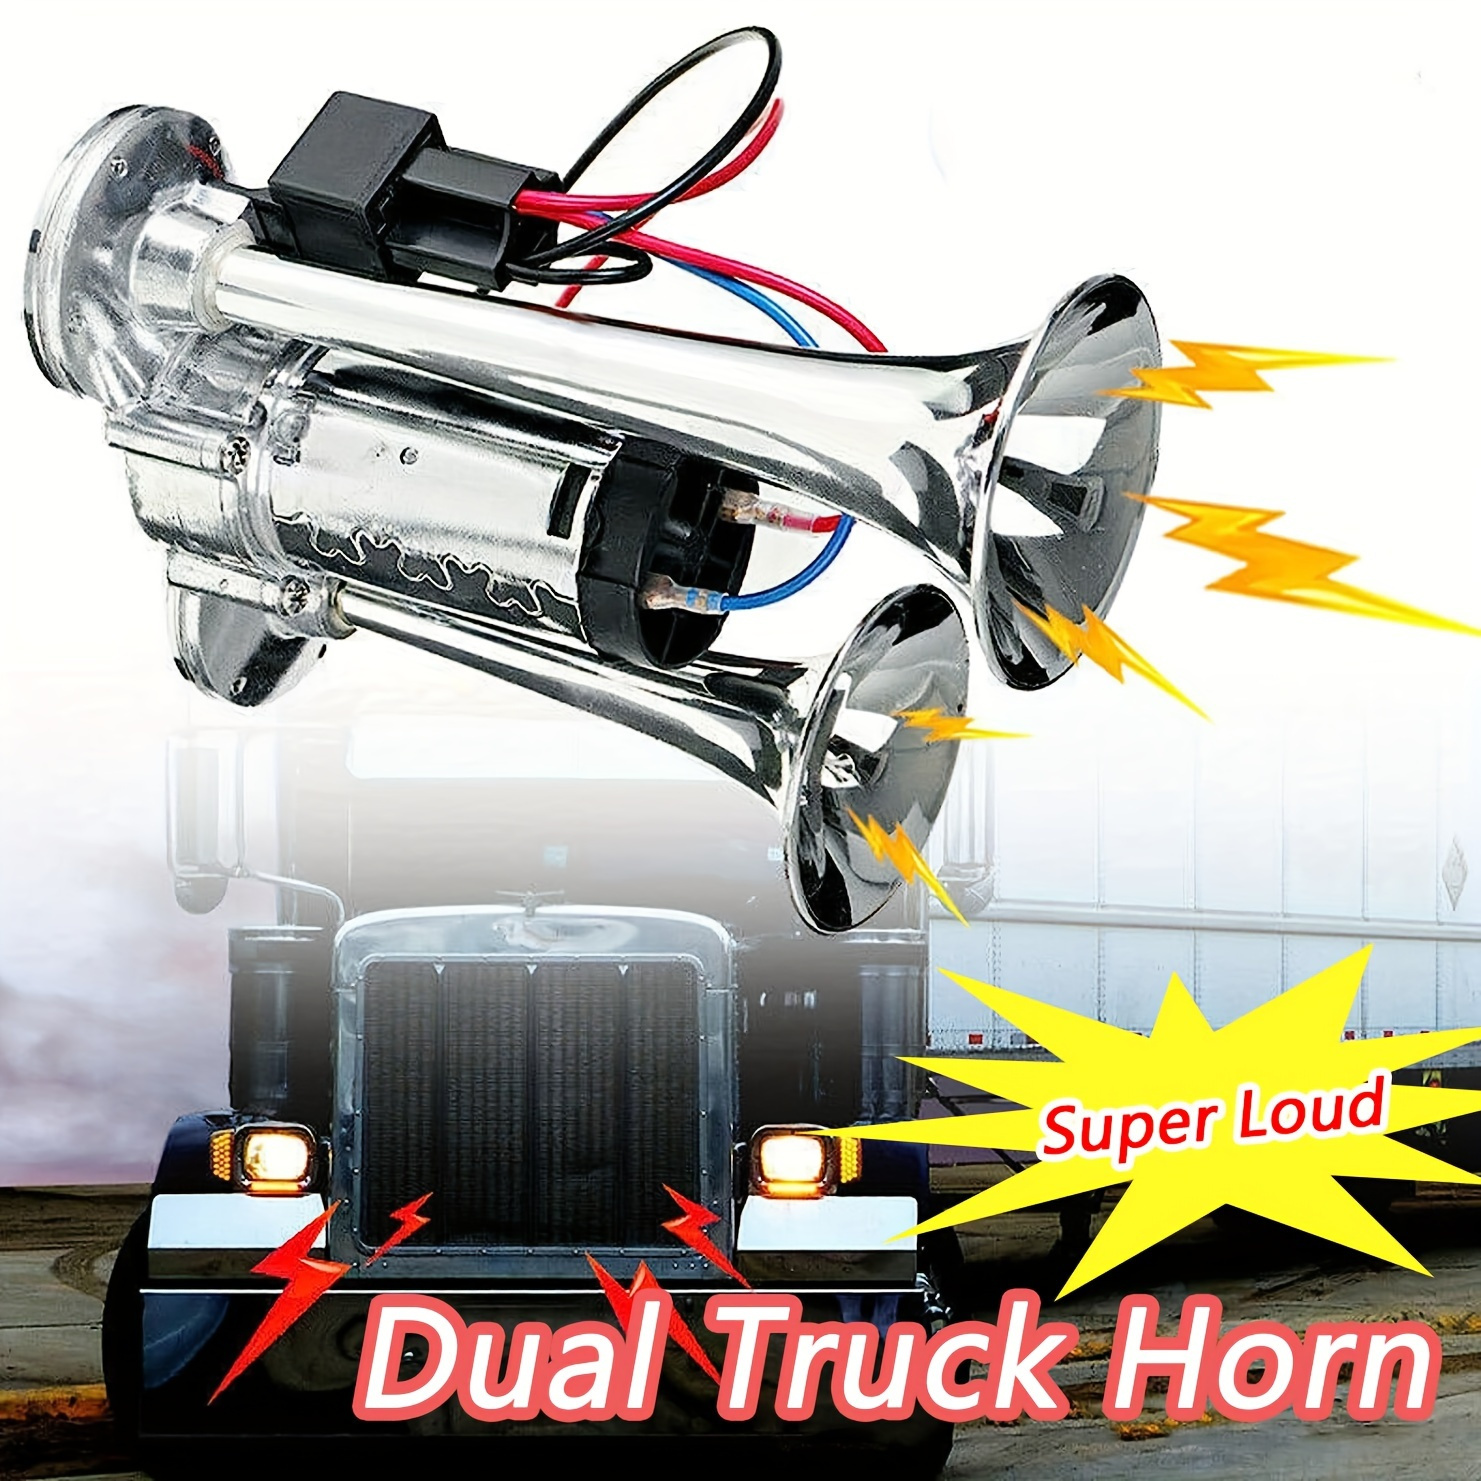 640MM Super Loud Single Horn Square Semi Truck Air Horn 12V/24V with  Electric Valve Control Hose Car Replacement Parts - AliExpress